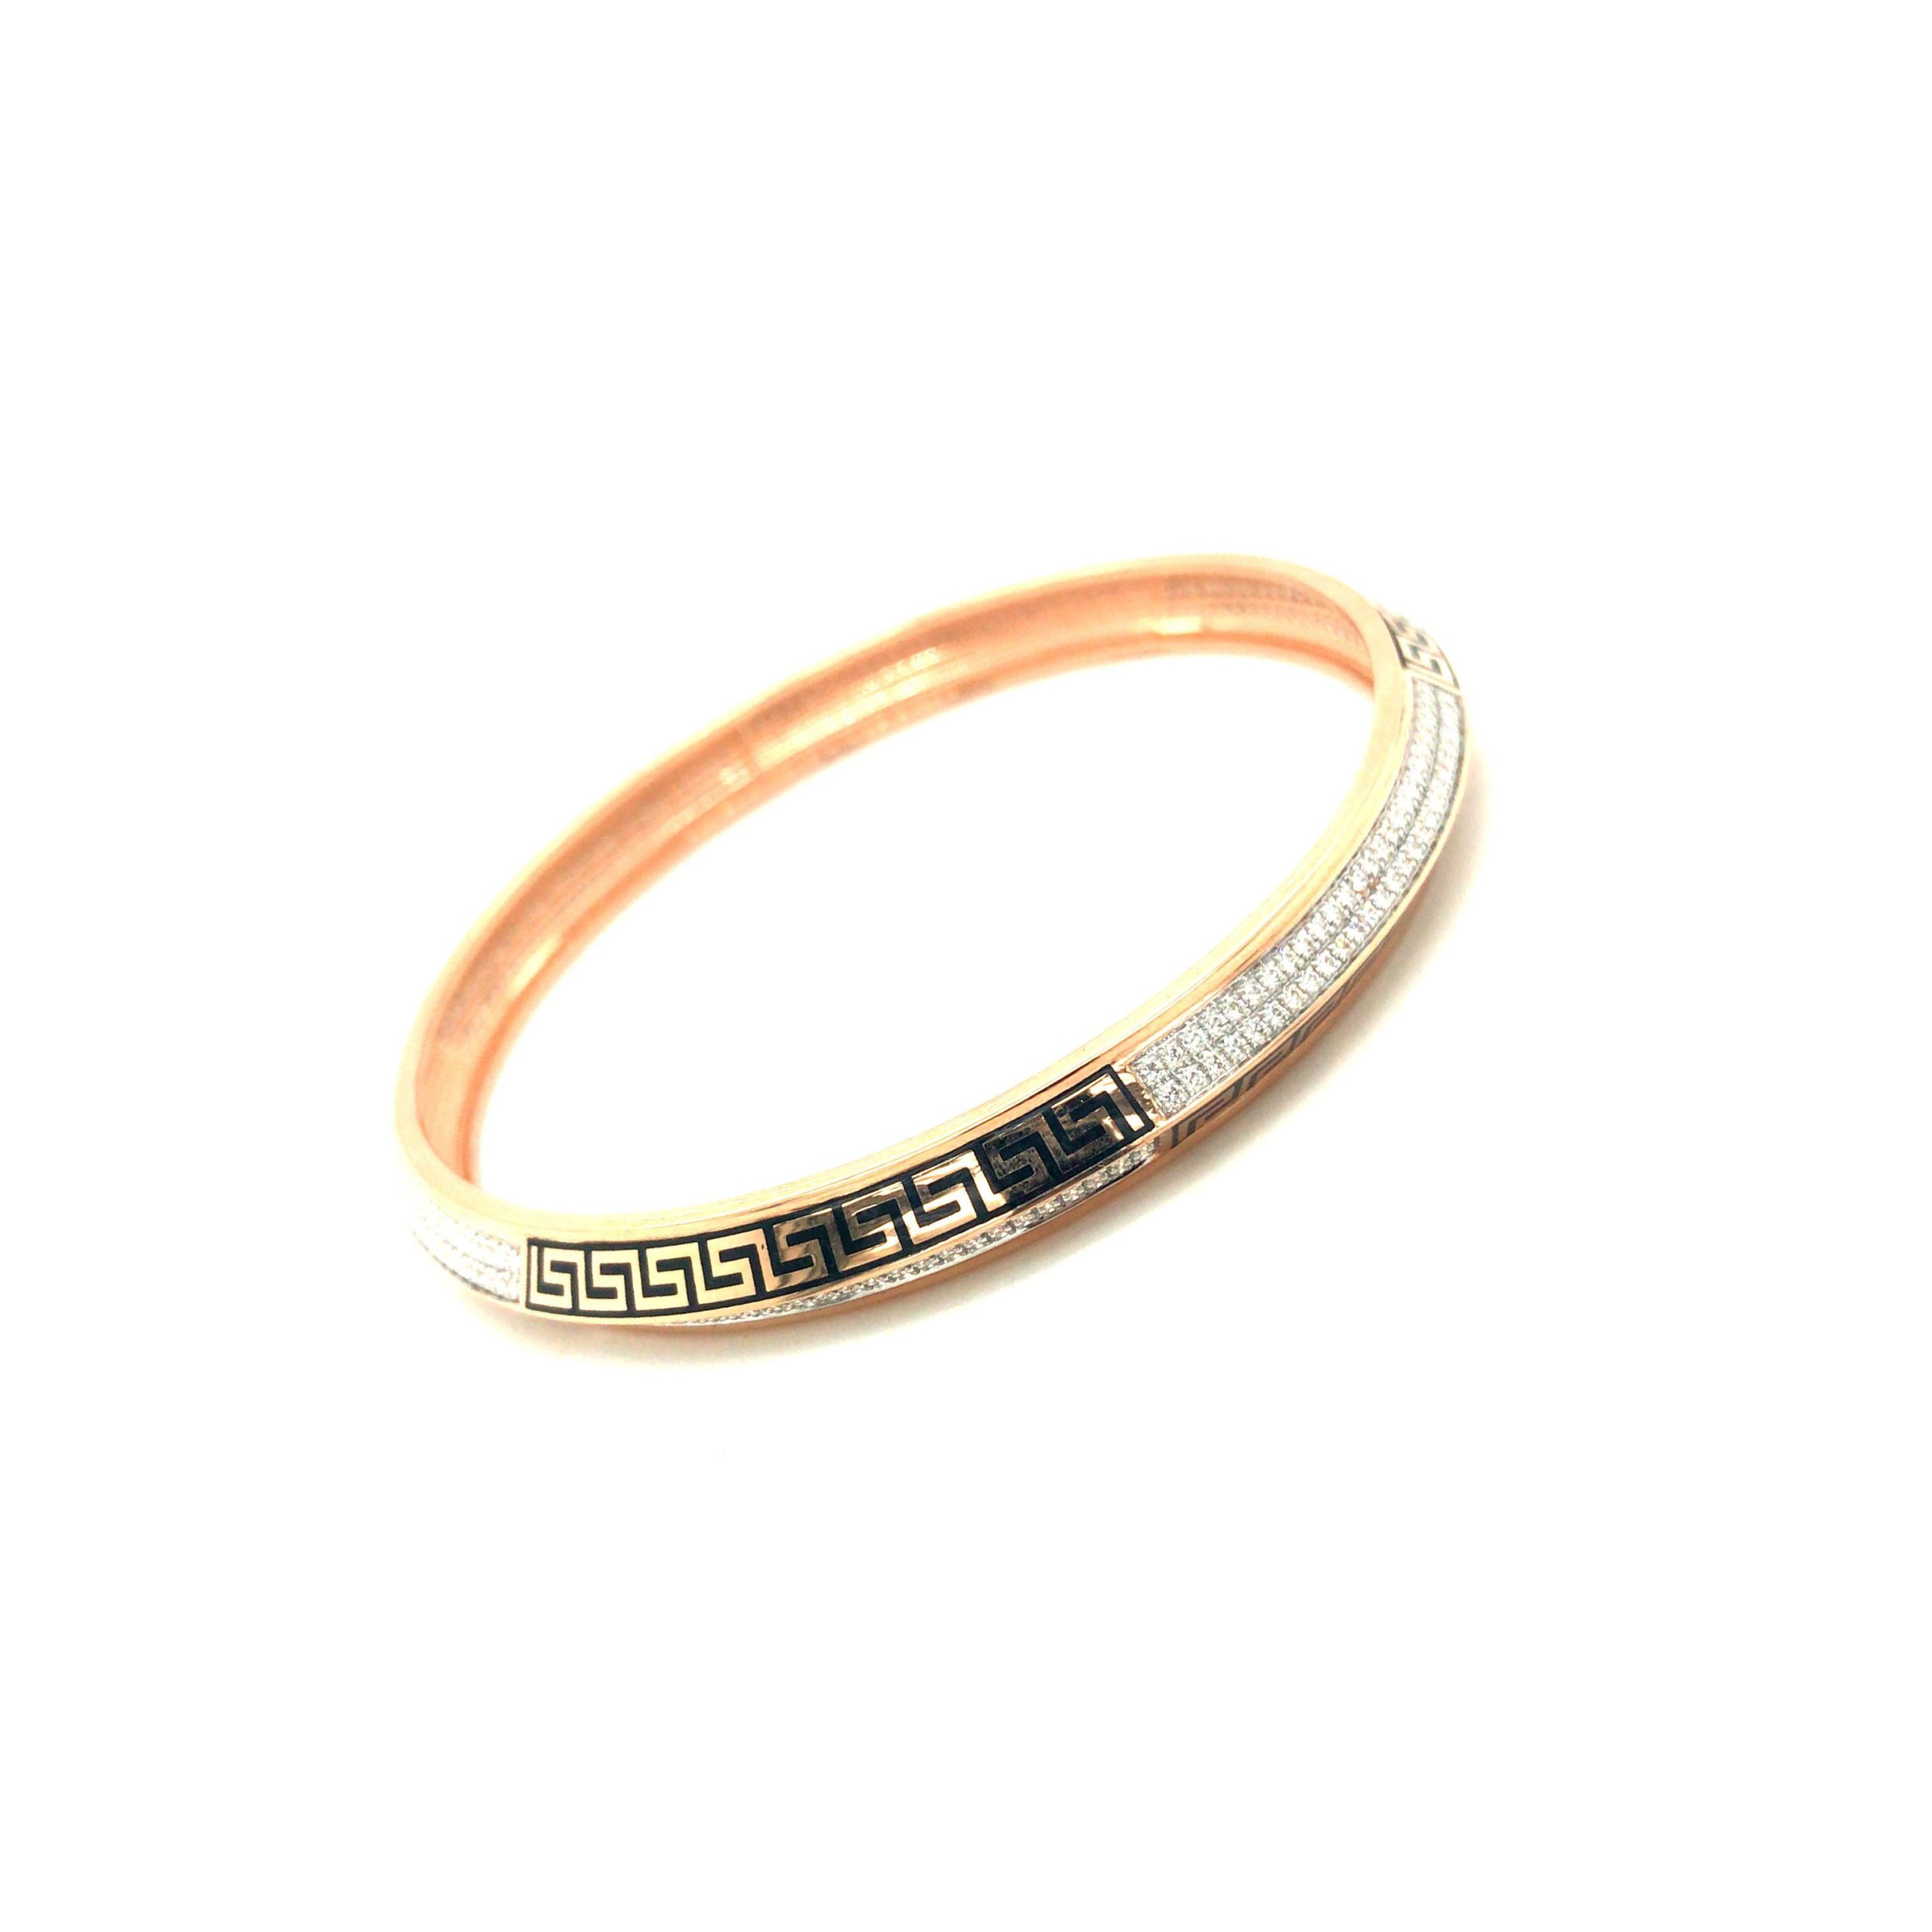 Geometric Hollow Bangle Bracelet For Women 18K Gold Plated With Metal  Buckle Perfect Travel Wedding Rings Gift From Sunny2016518, $7.75 |  DHgate.Com